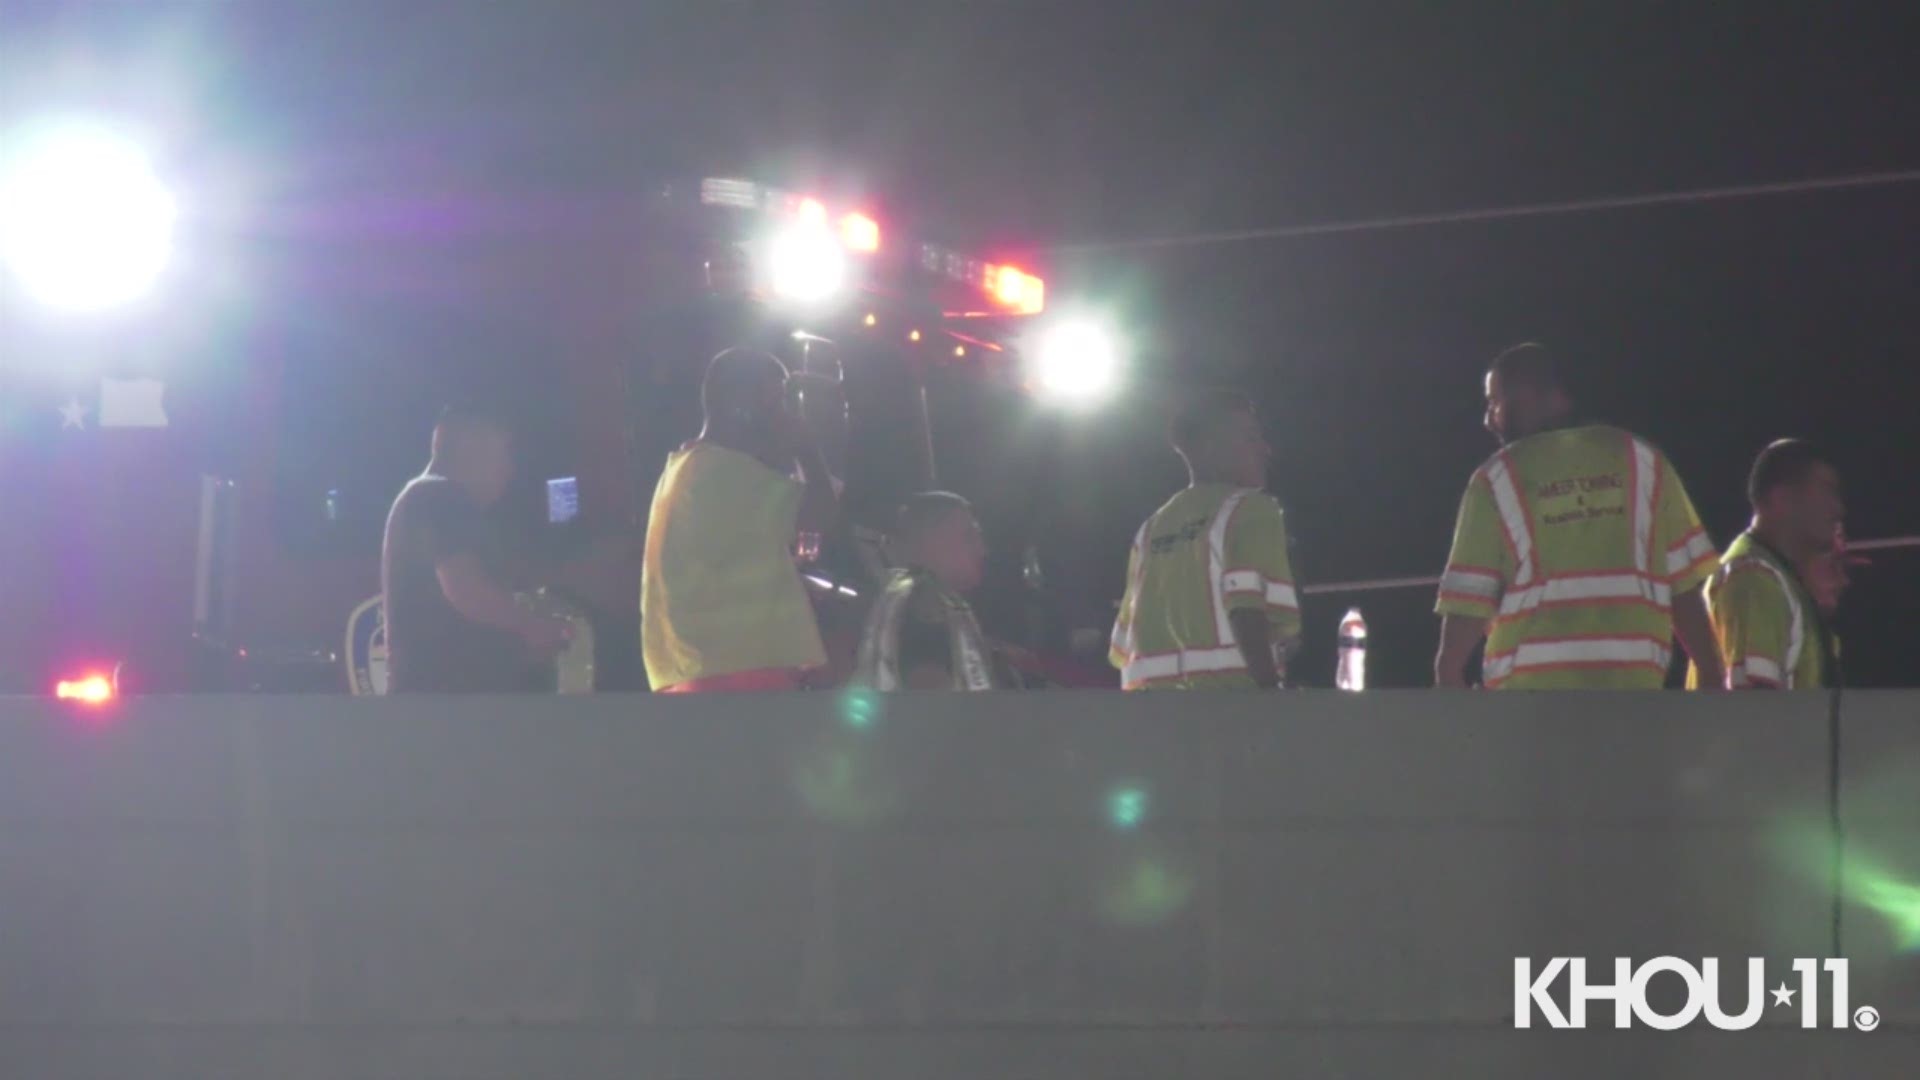 Two deputies were injured and a prisoner died after their SUV was struck by a suspected drunken driver going to the wrong way in west Harris County overnight, the sheriff confirmed.